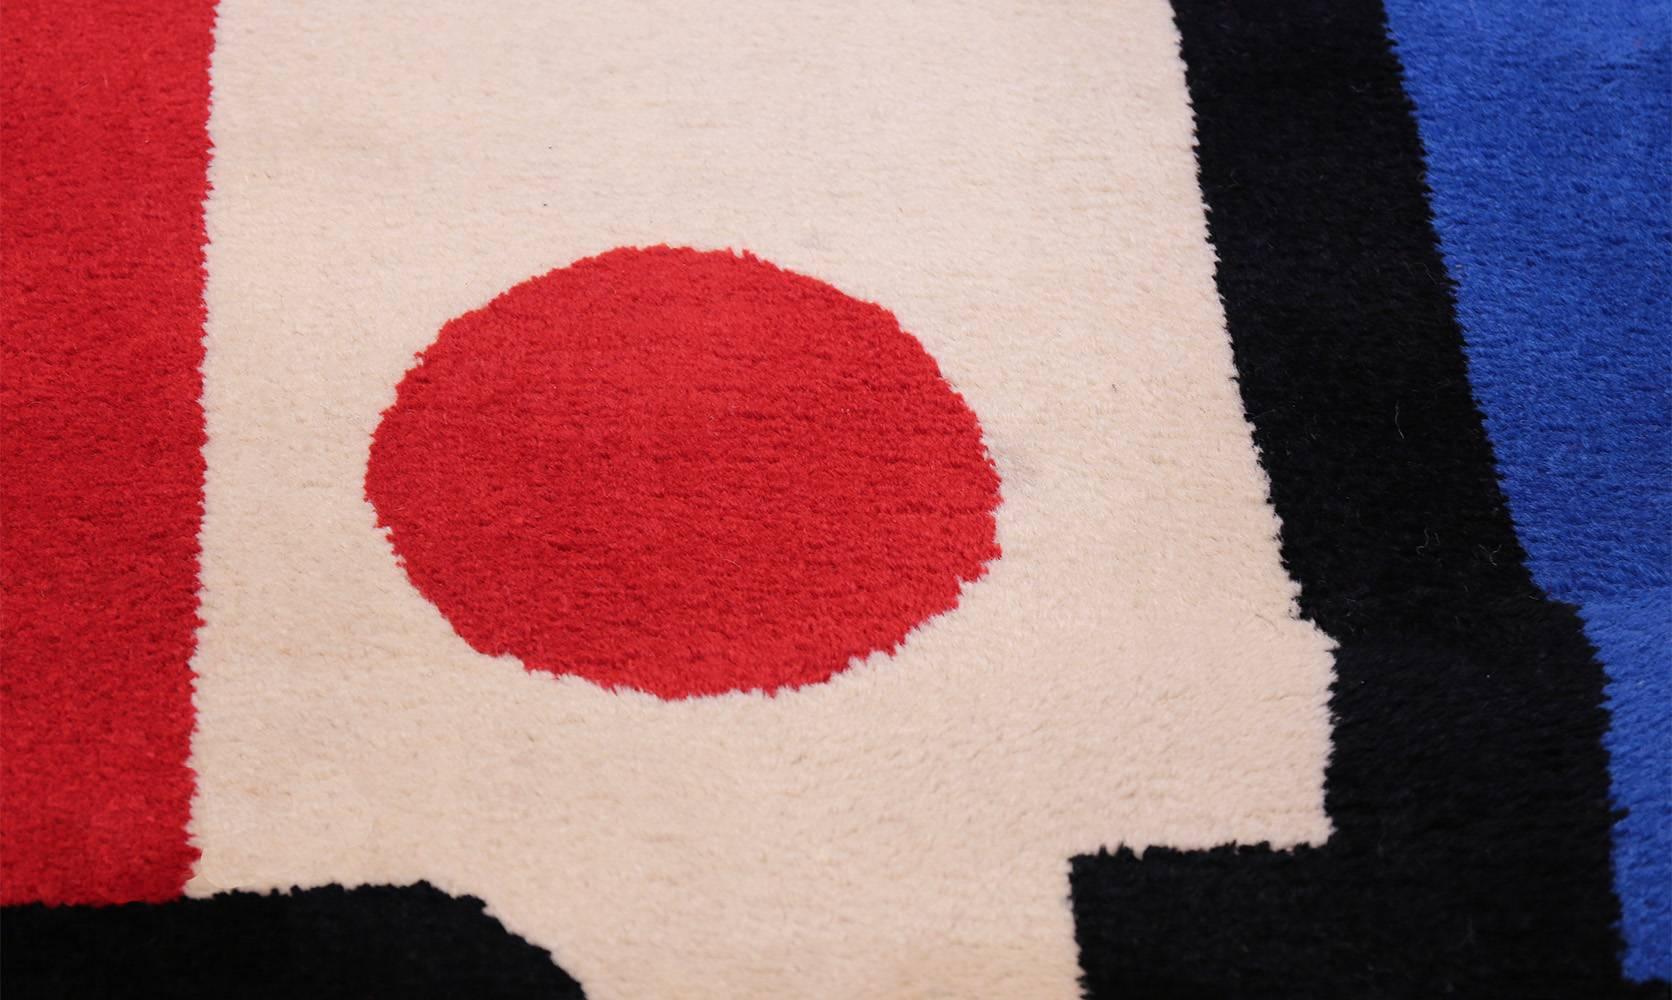 Breathtaking Fernand Leger No 9 Rouge design vintage French rug, country of origin / rug type: France, circa late 20th century – This breathtaking vintage French rug is exemplary of Fernand Leger’s work.  It features primary colors and elements in